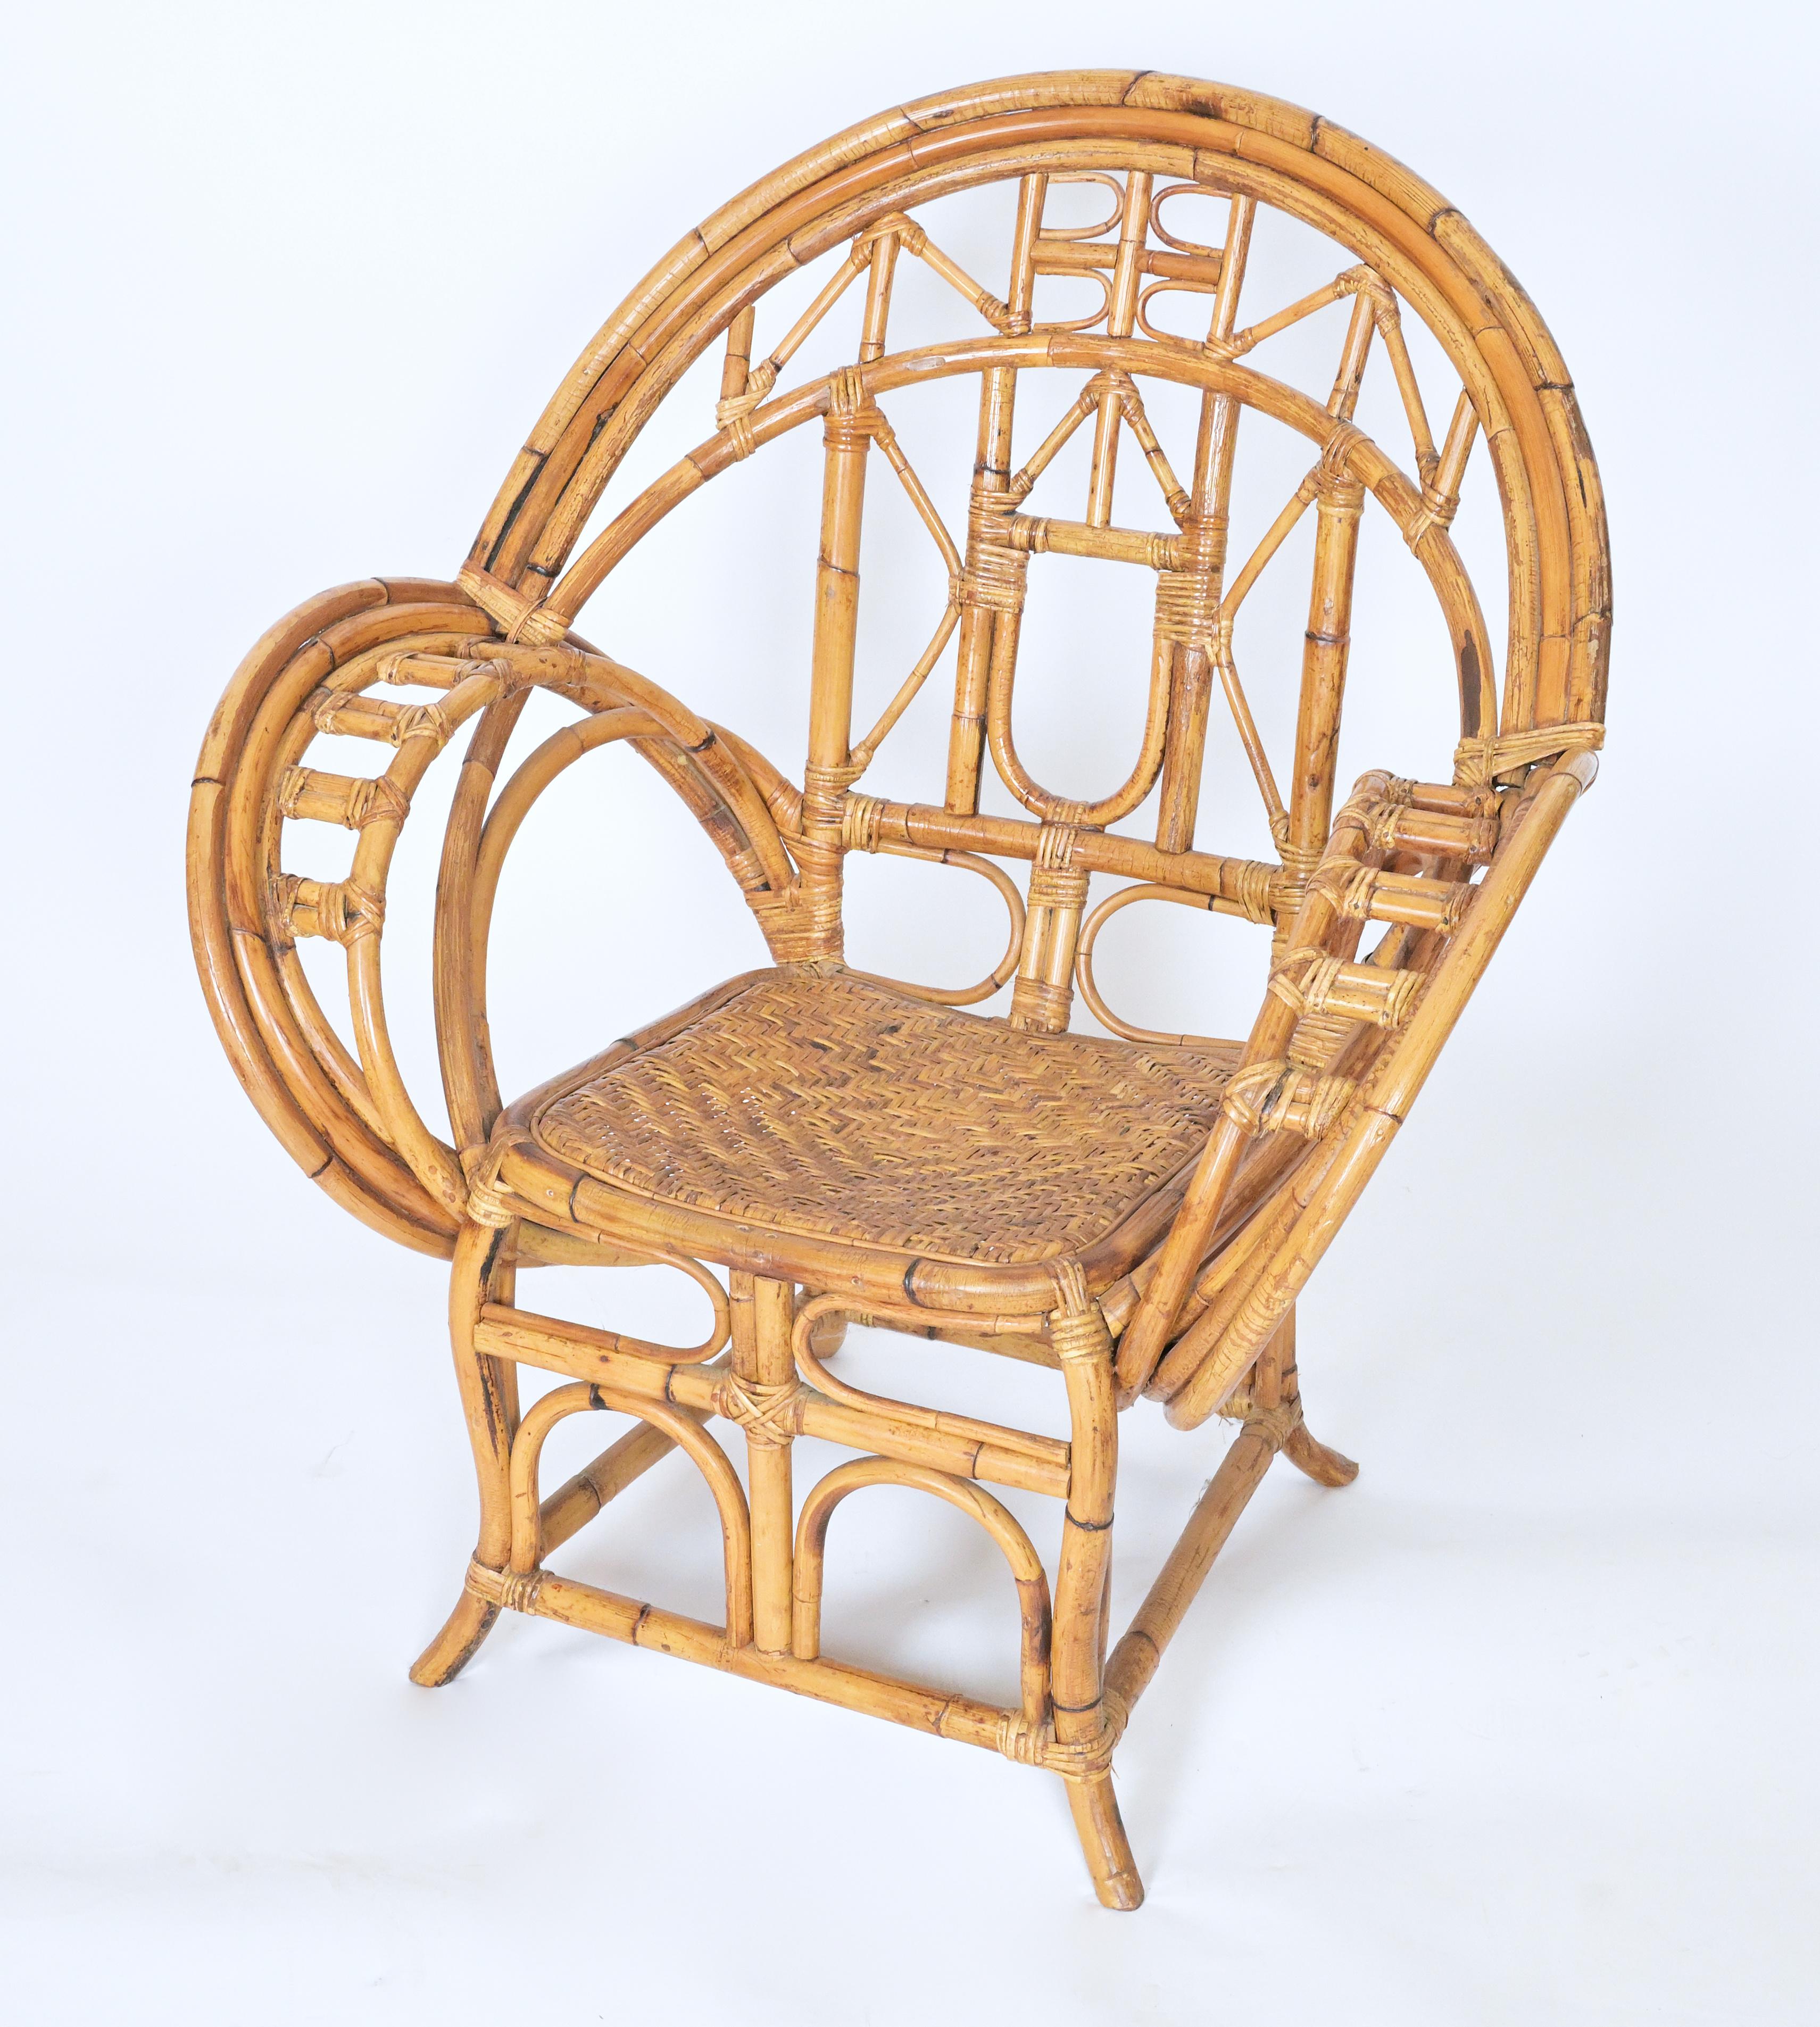 A pair of caned bamboo armchairs with tall curved backs and arms.